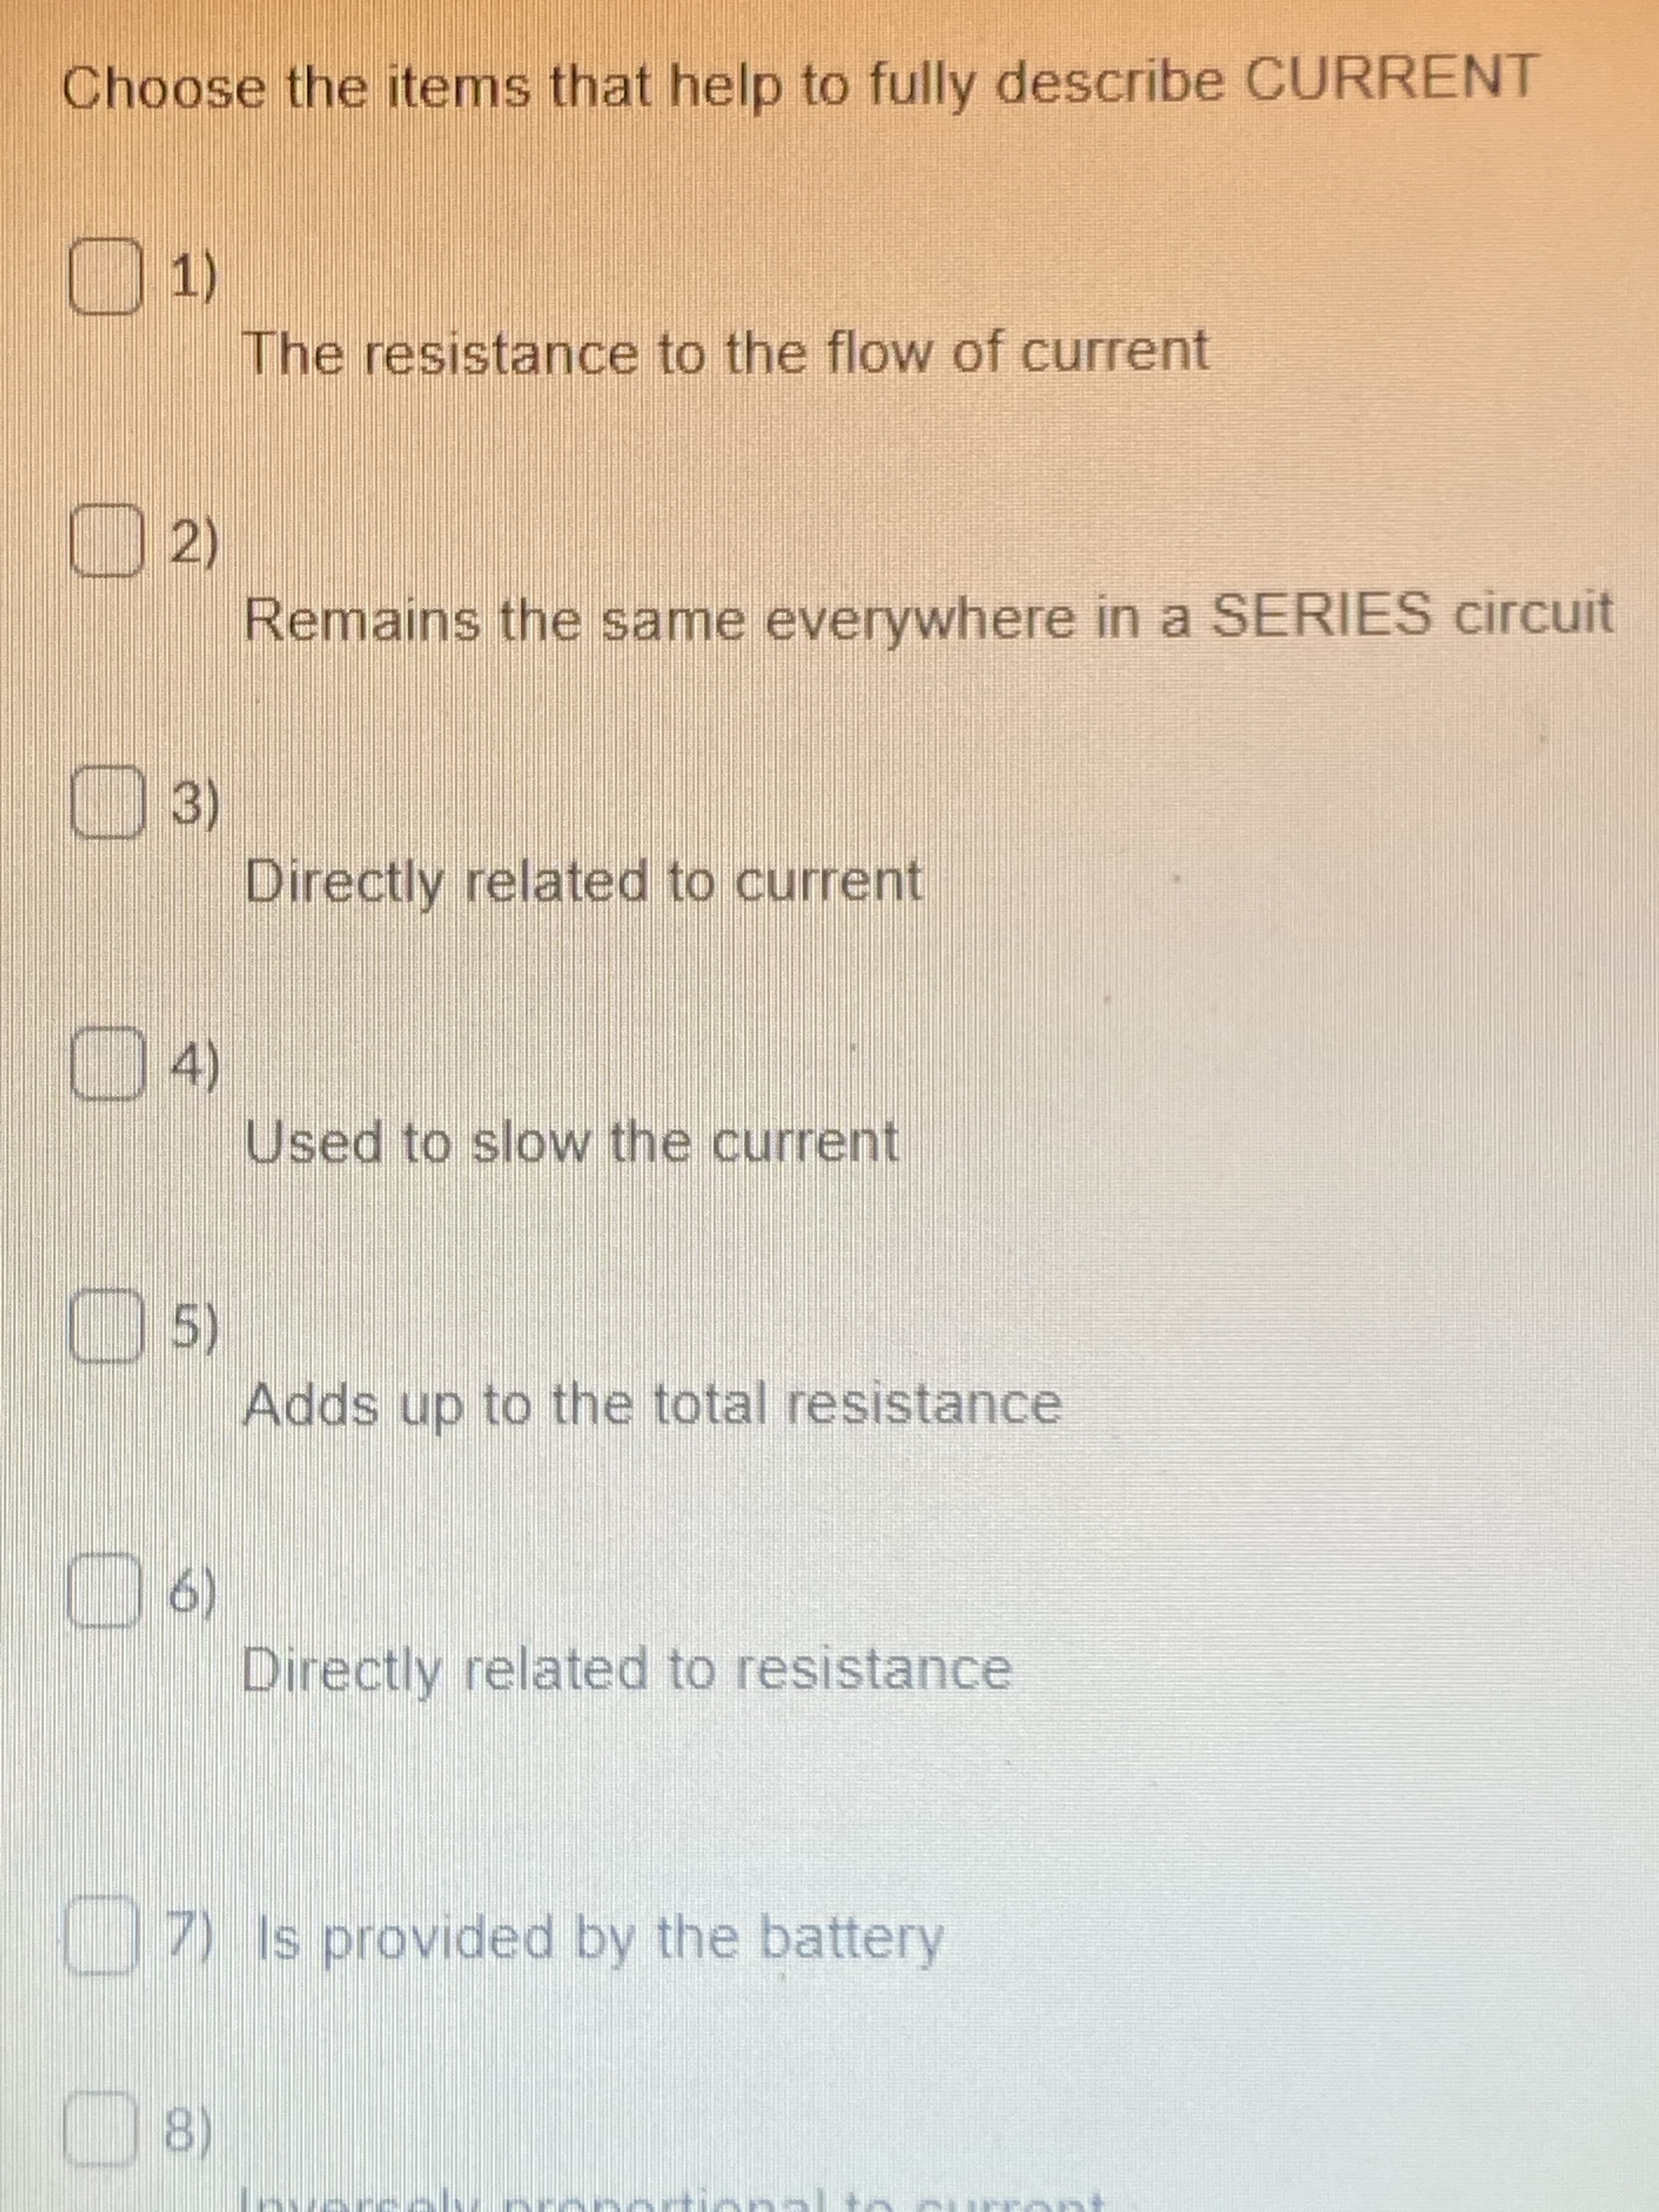 Choose the items that help to fully describe CURRENT
01)
The resistance to the flow of current
2)
Remains the same everywhere in a SERIES circuit
(3)
Directly related to current
D4)
Used to slow the current
5)
Adds up to the total resistance
6)
Directly related to resistance
(9 0
U7) Is provided by the battery
